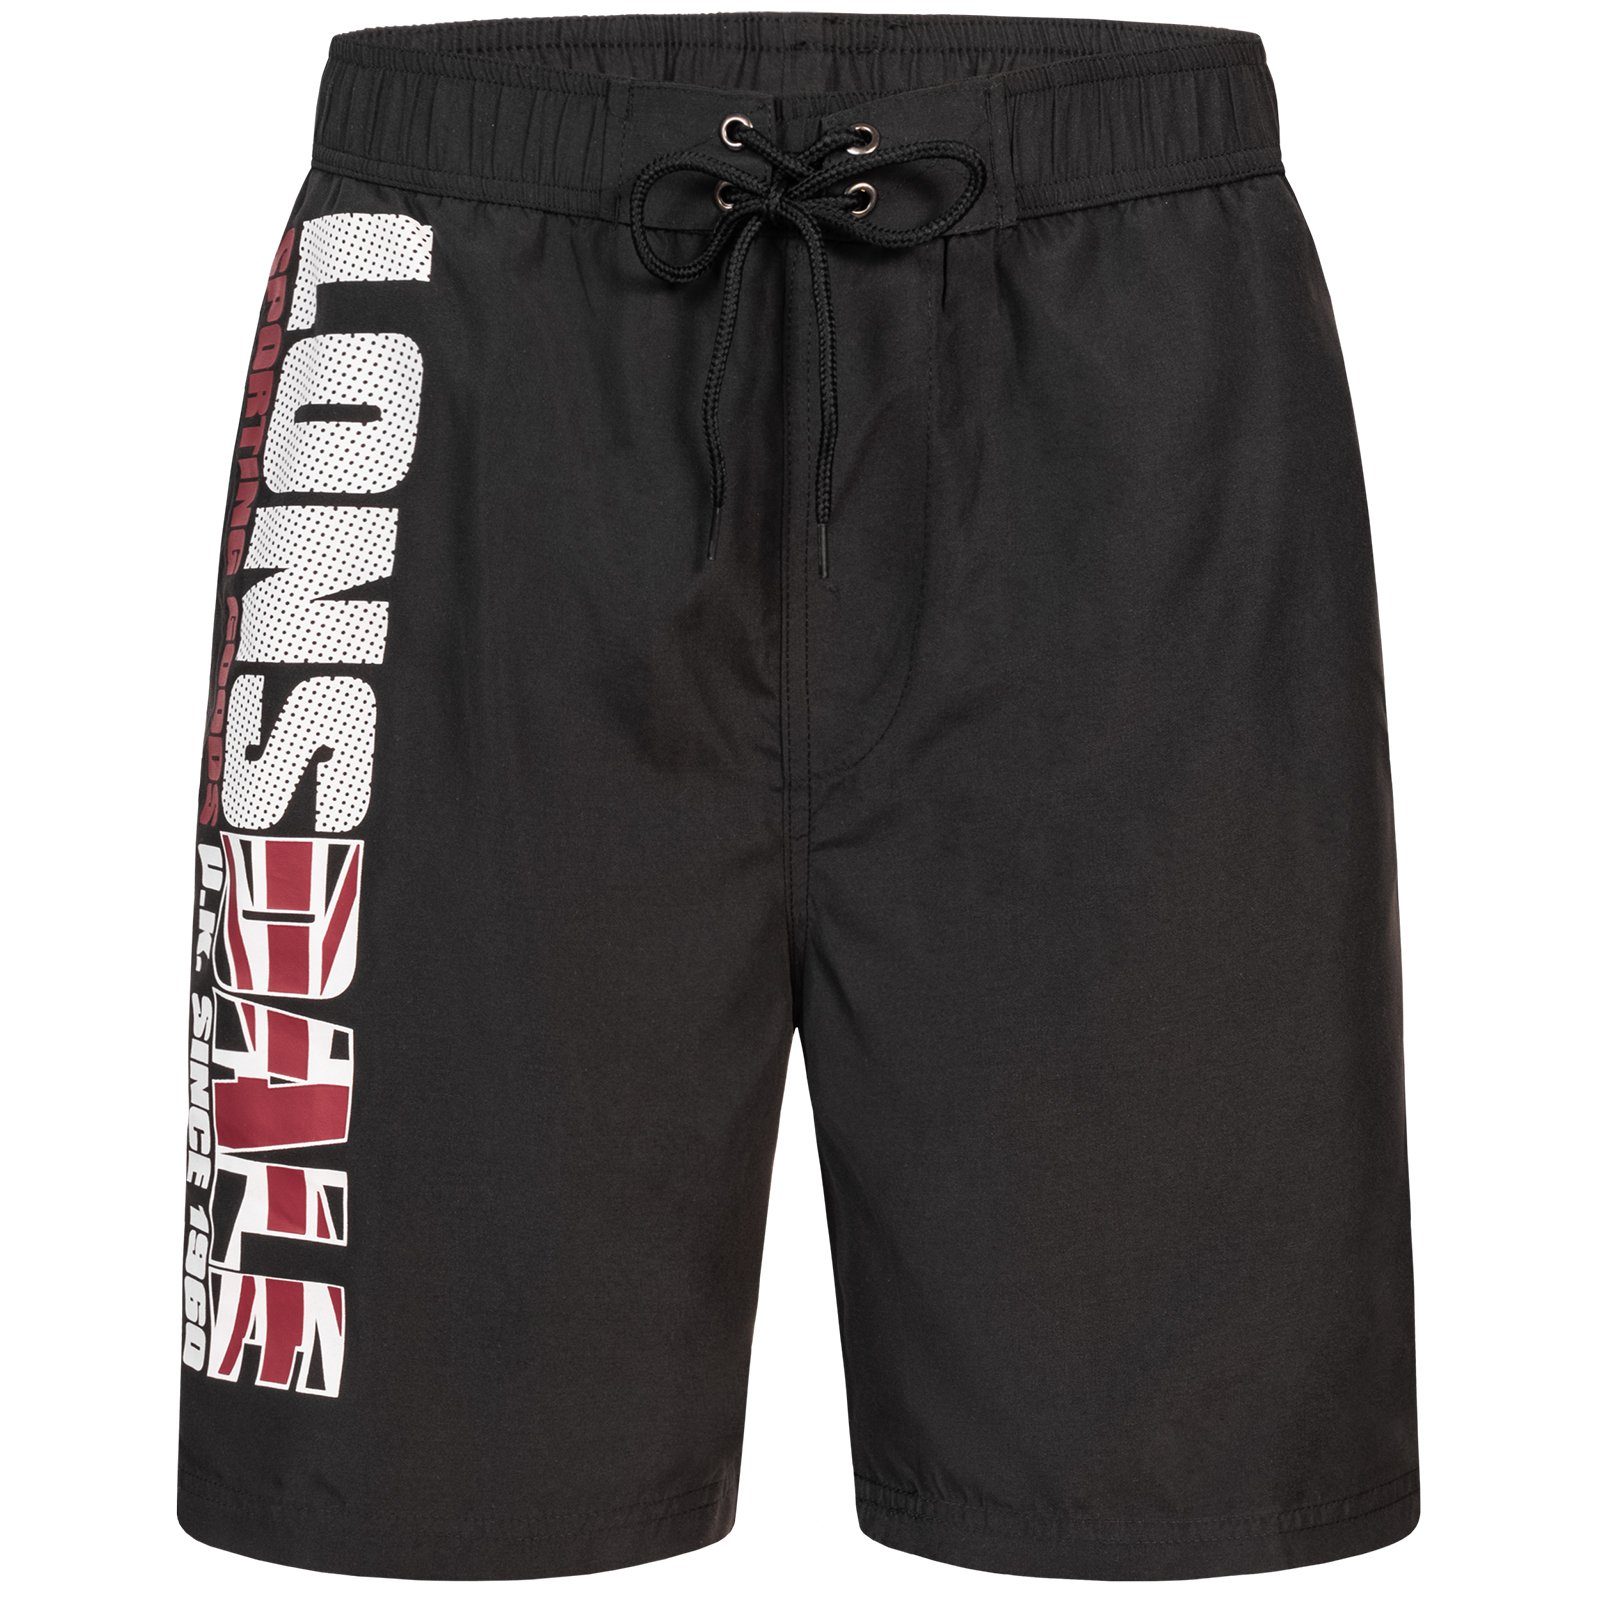 Lonsdale Badehose CARNKIE Black/Red/White